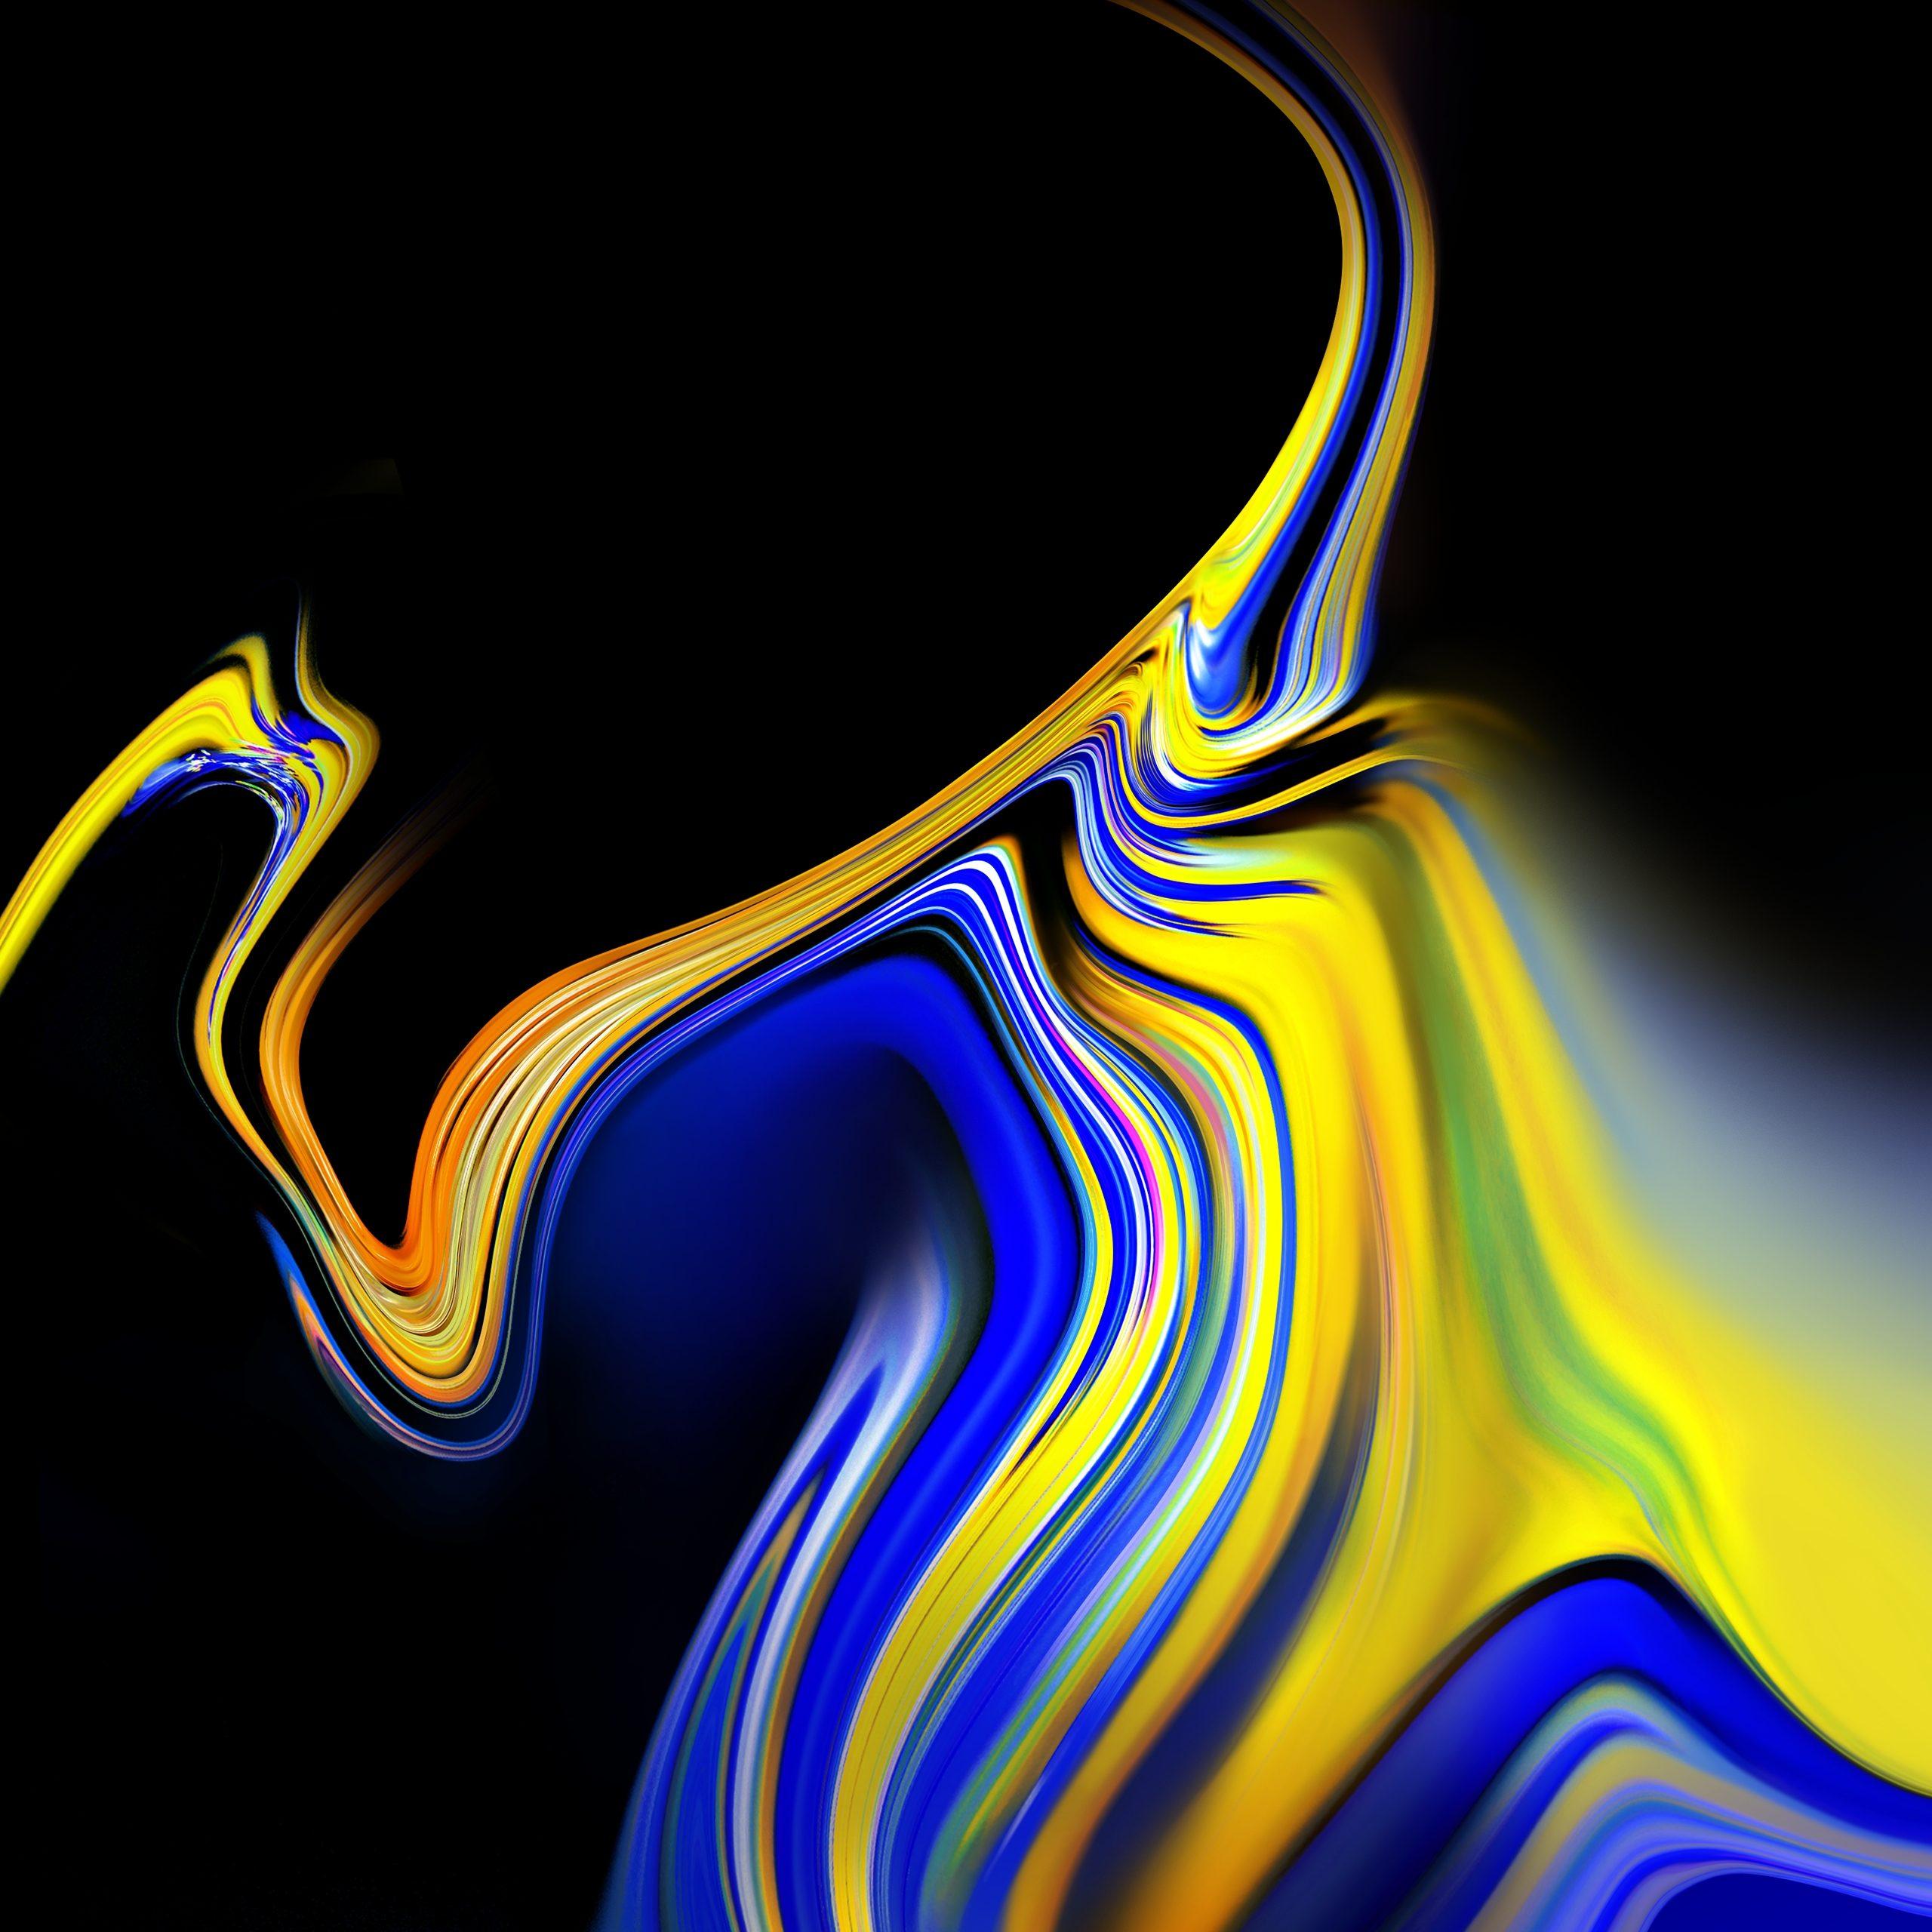 Download the Samsung Galaxy Note 9's default wallpaper here